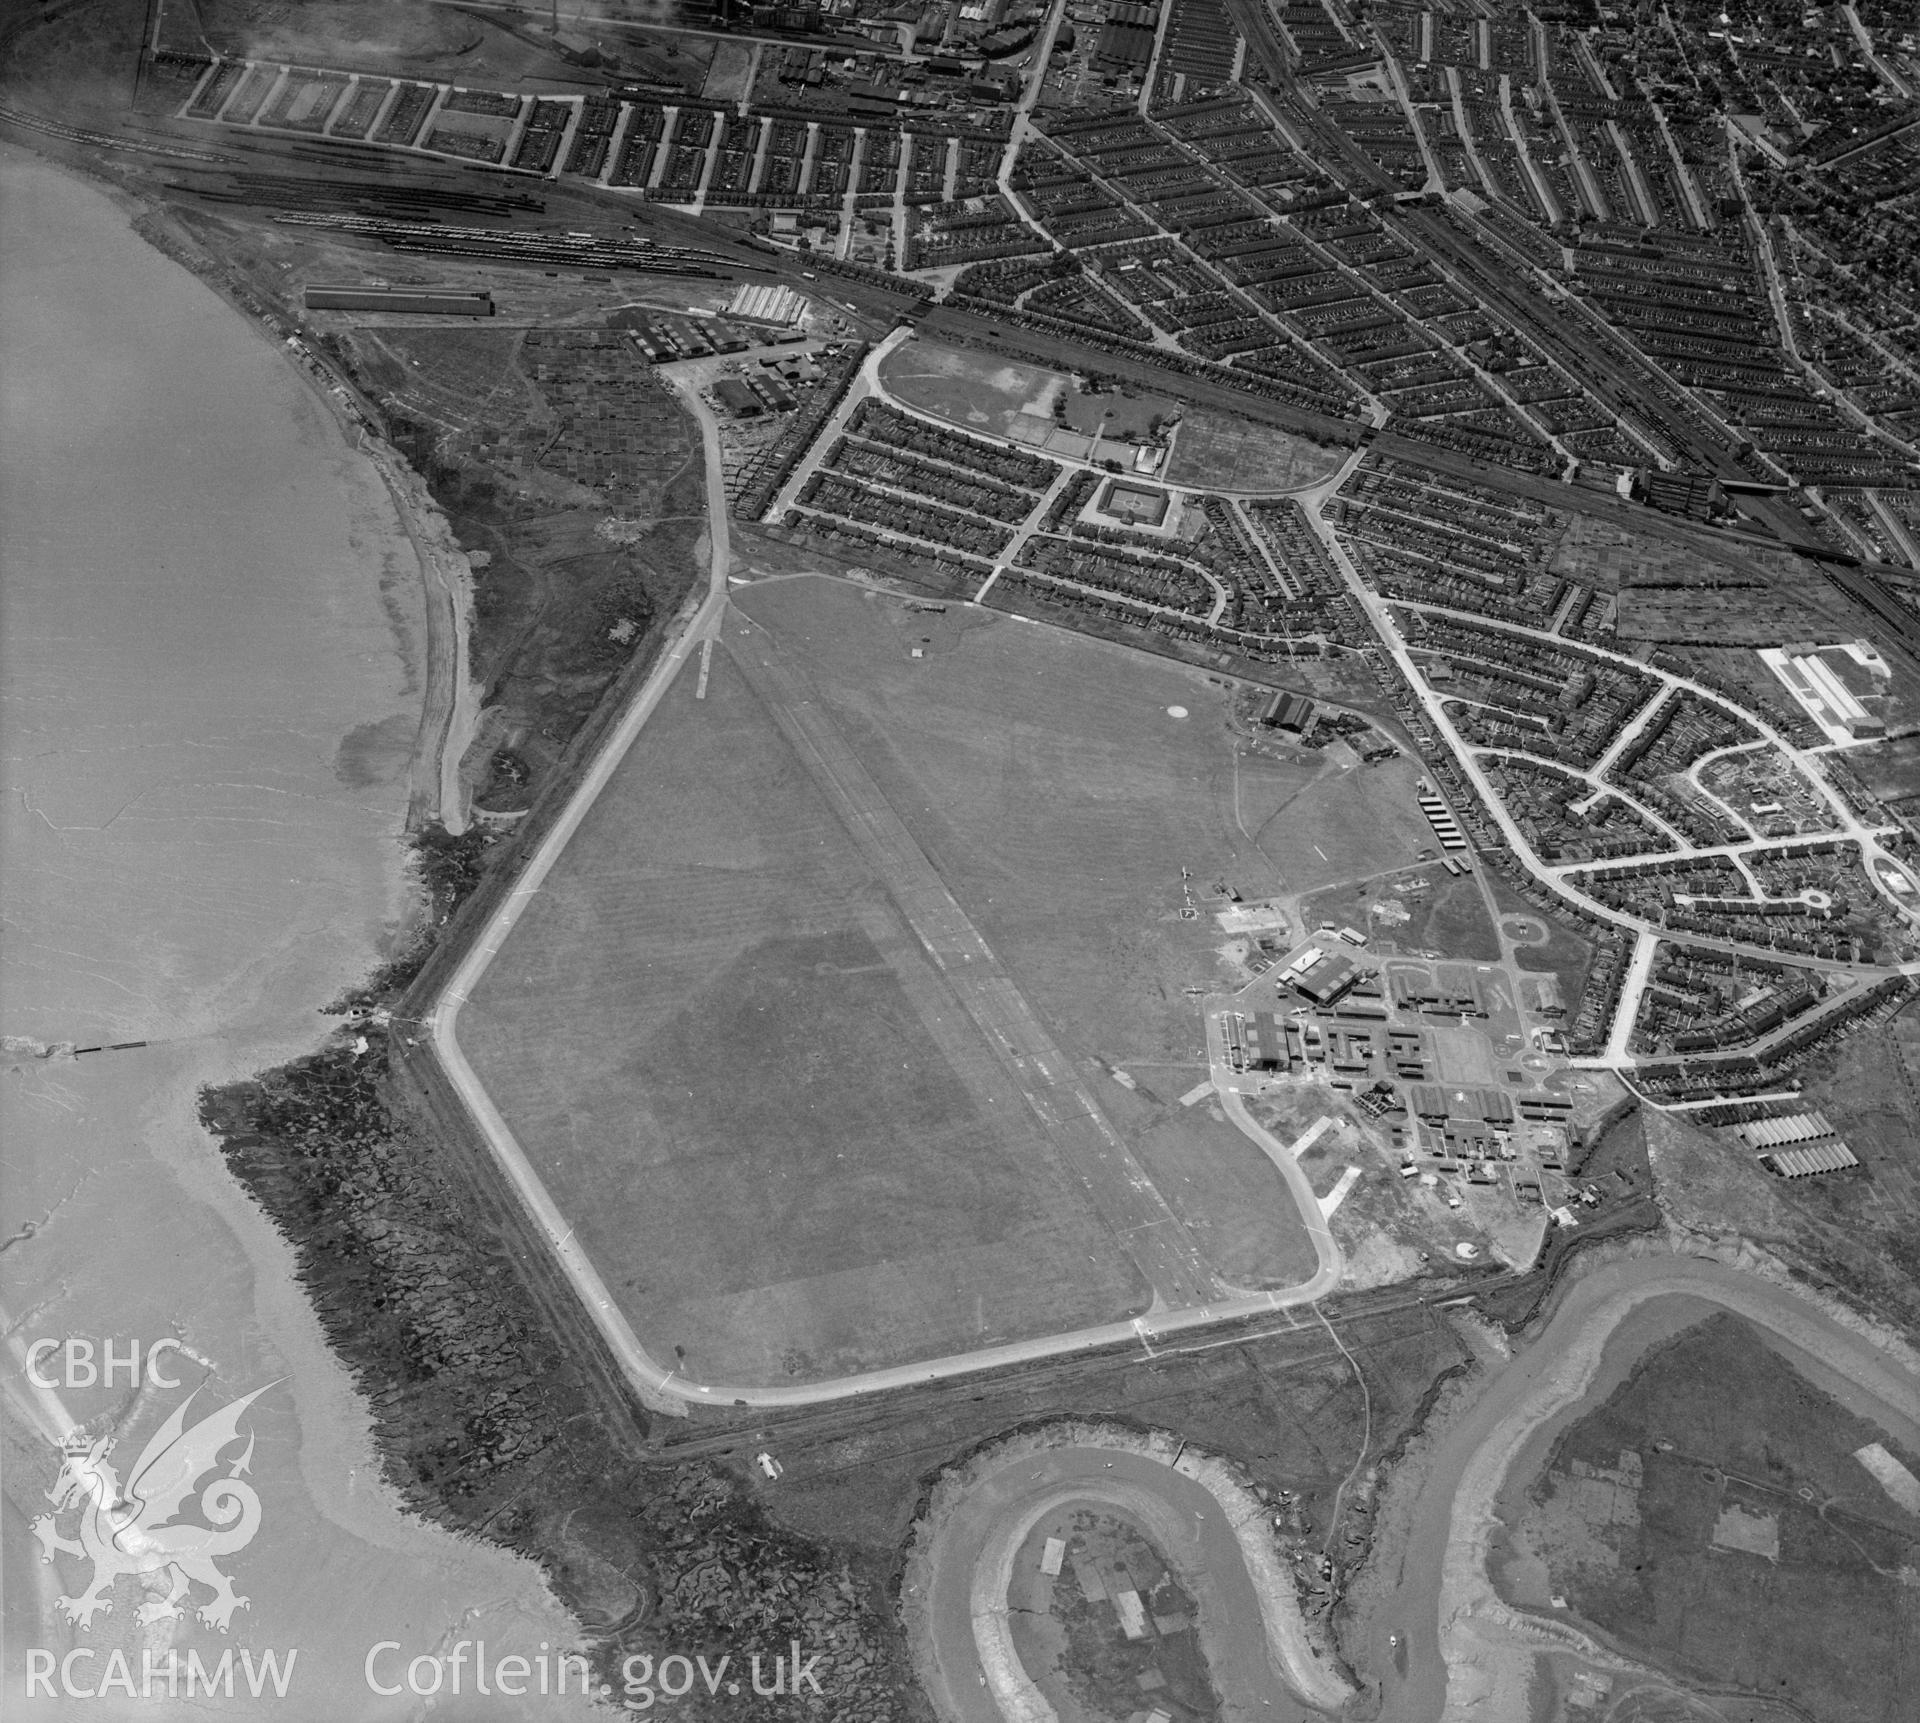 View of Cardiff Aerodrome, Cardiff, showing the facilities constructed during its wartime incarnation as RAF Cardiff